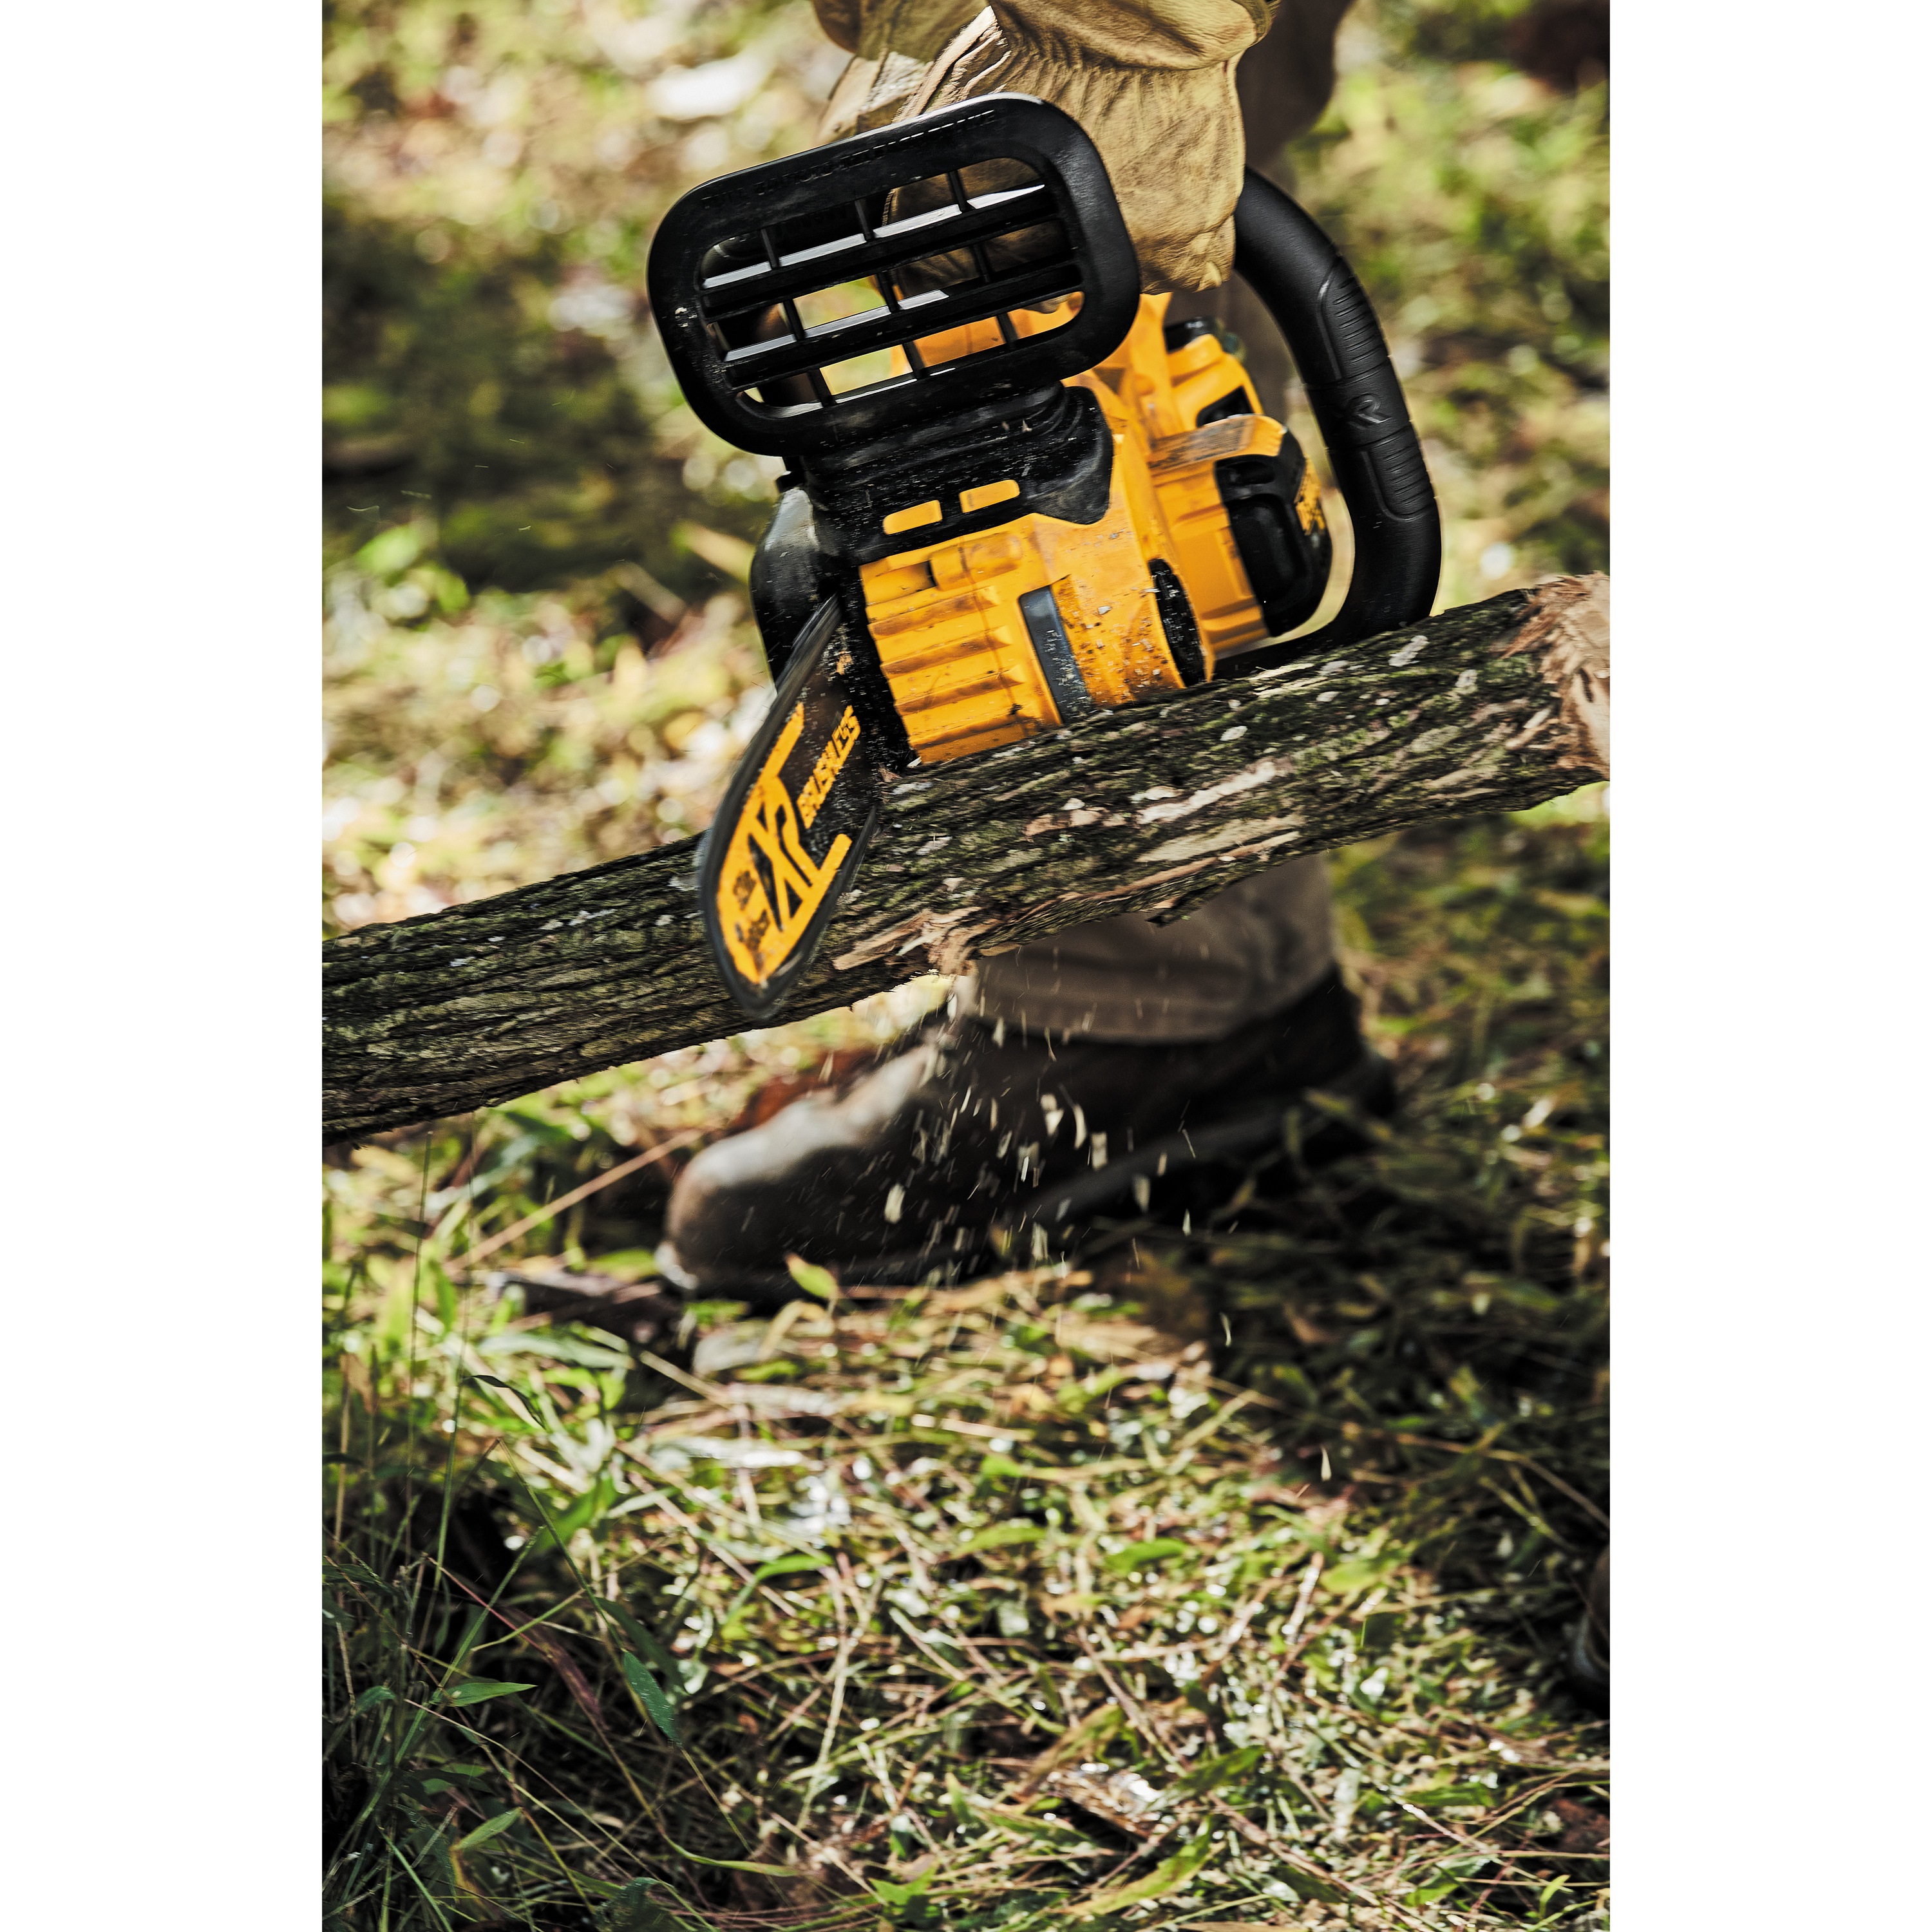 FLEXVOLT Cordless Chainsaw in use on a tree limb outdoors